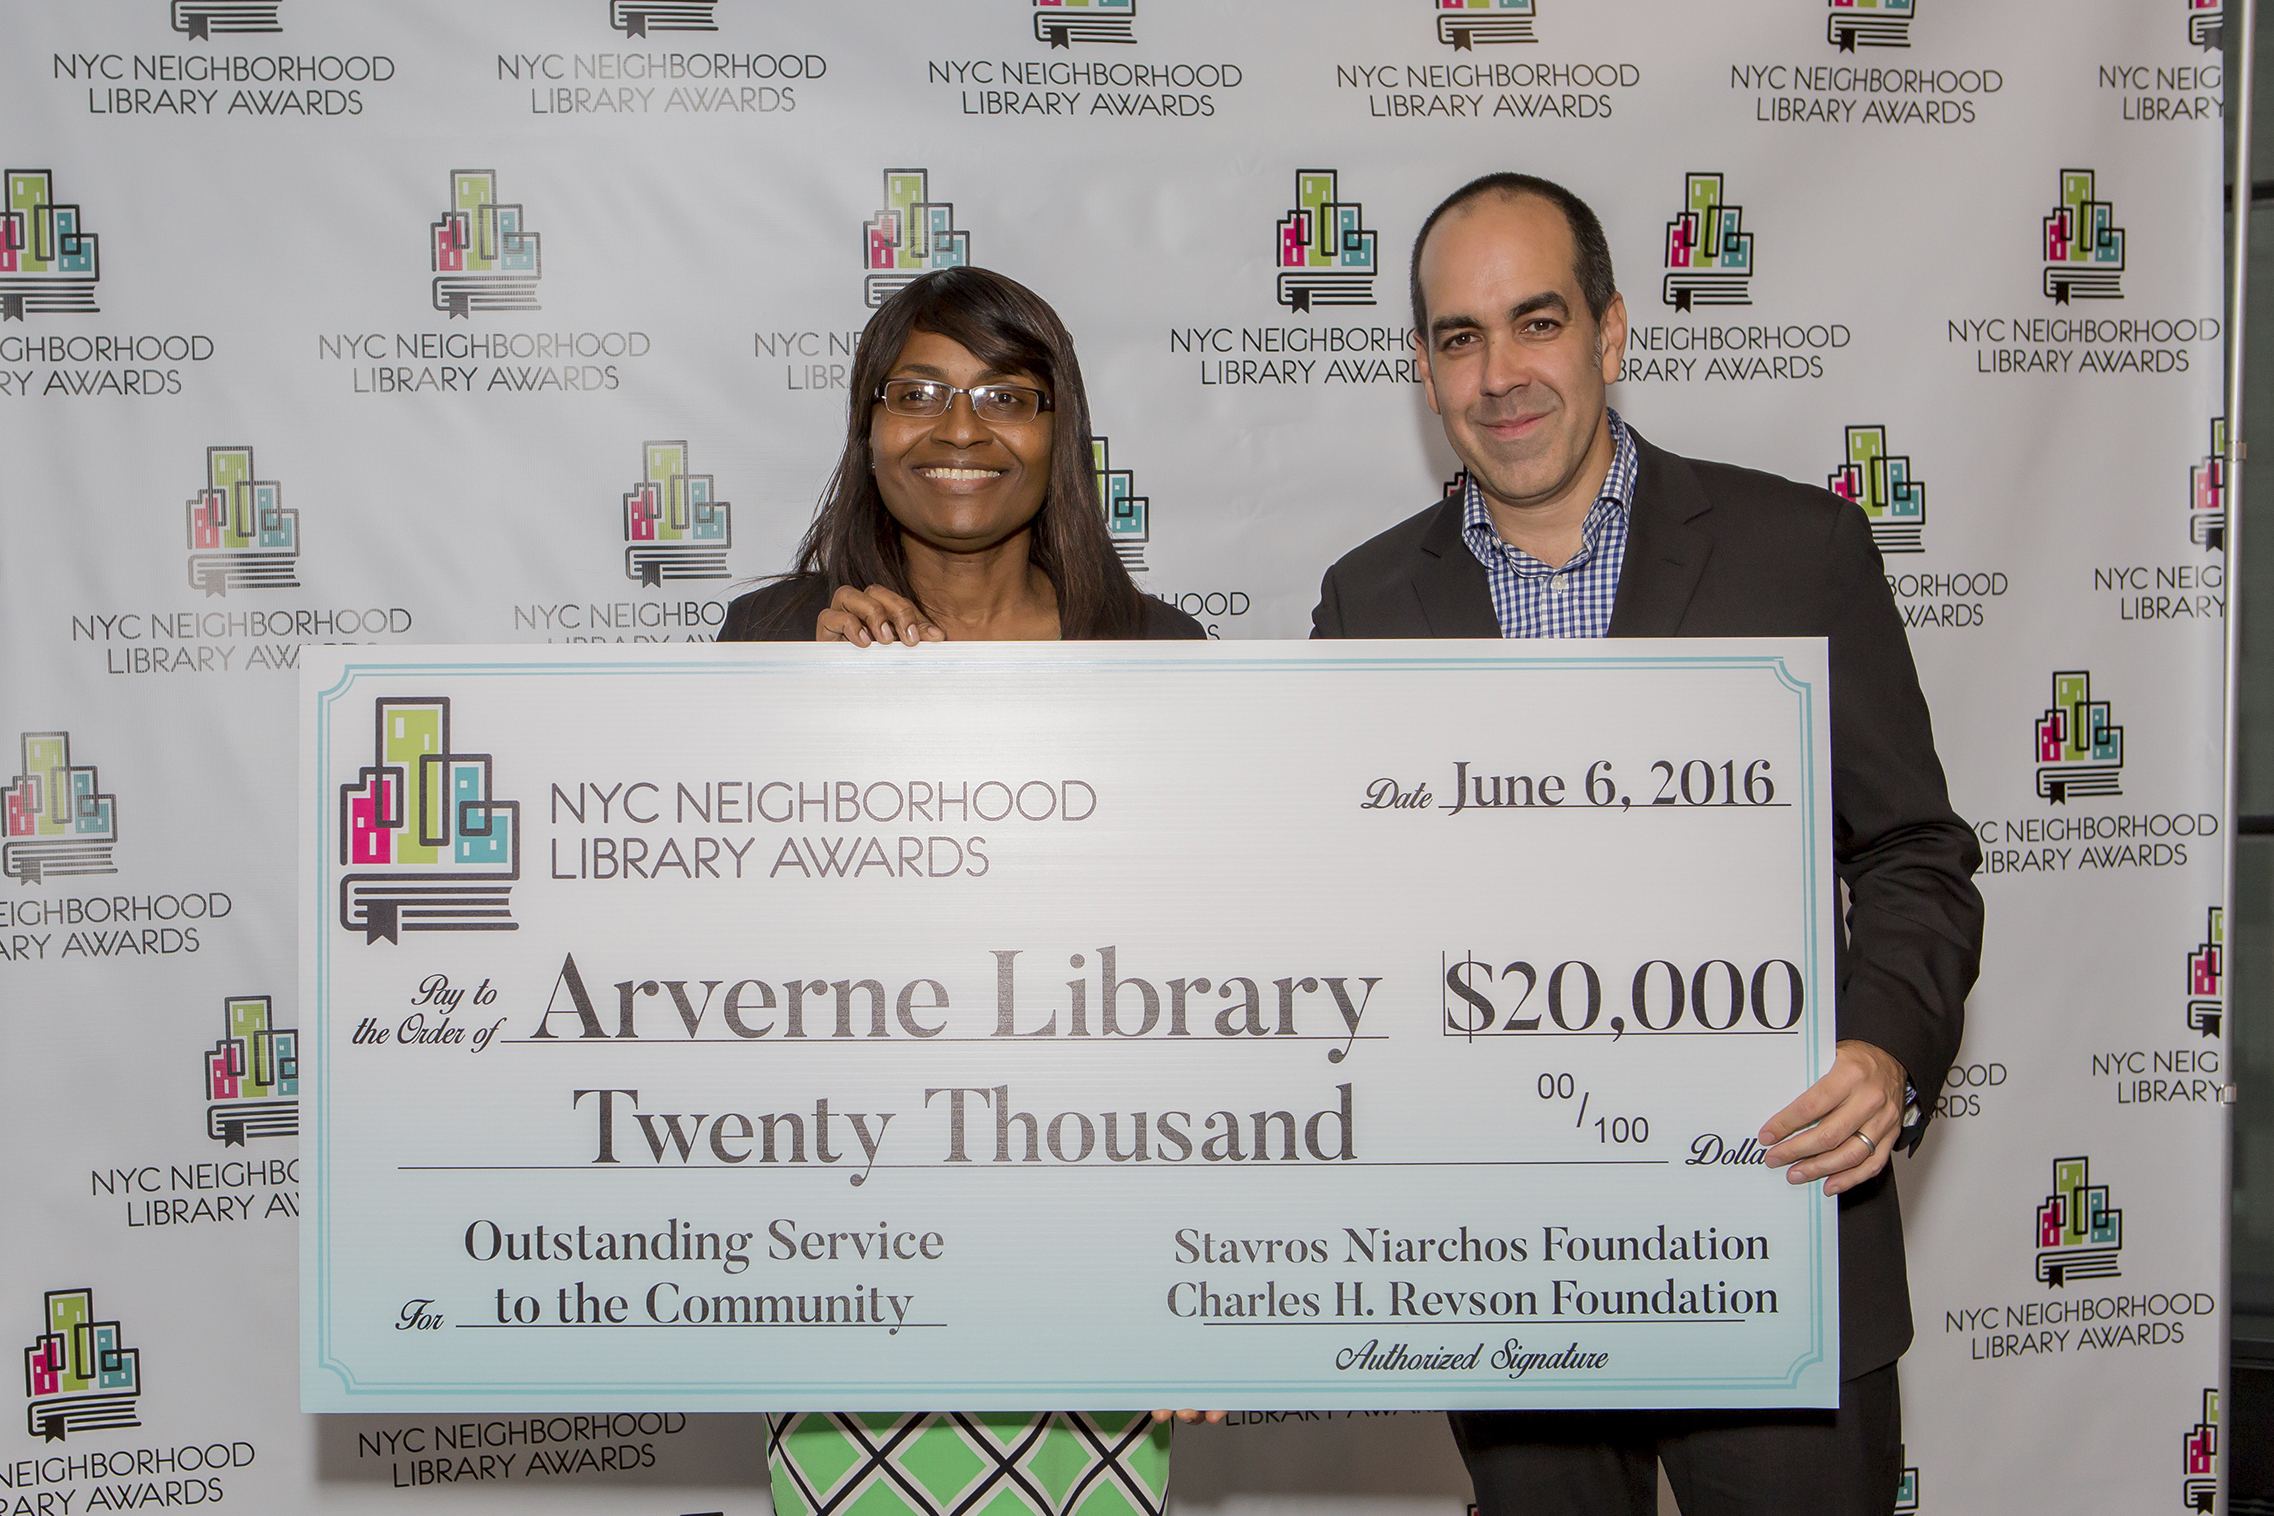 Nicole Gordon, Manager of the Arverne Library and Richard Reyes Gavilan, Executive Director of the D.C. Public Library & Library Awards Judge